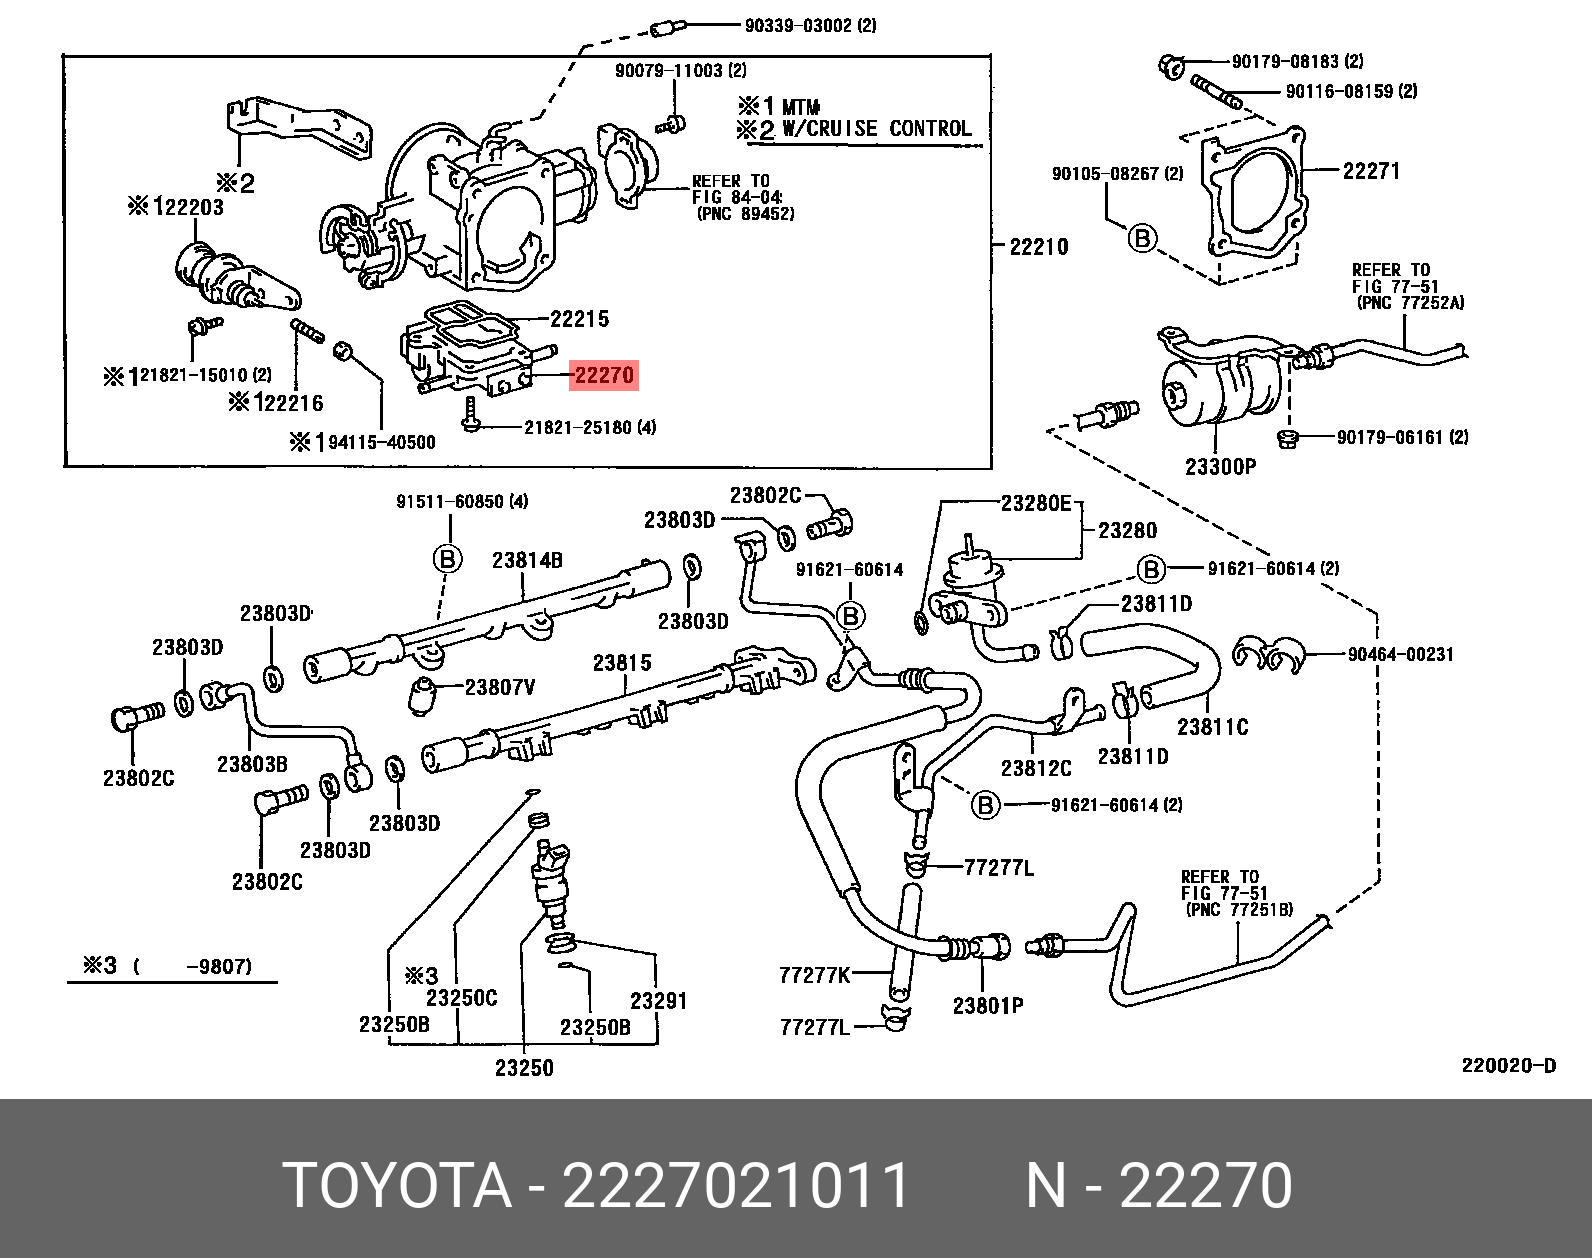 WILL CYPHA 200209 - 200507, VALVE ASSY, IDLE SPEED CONTROL(FOR THLOTTLE BODY)